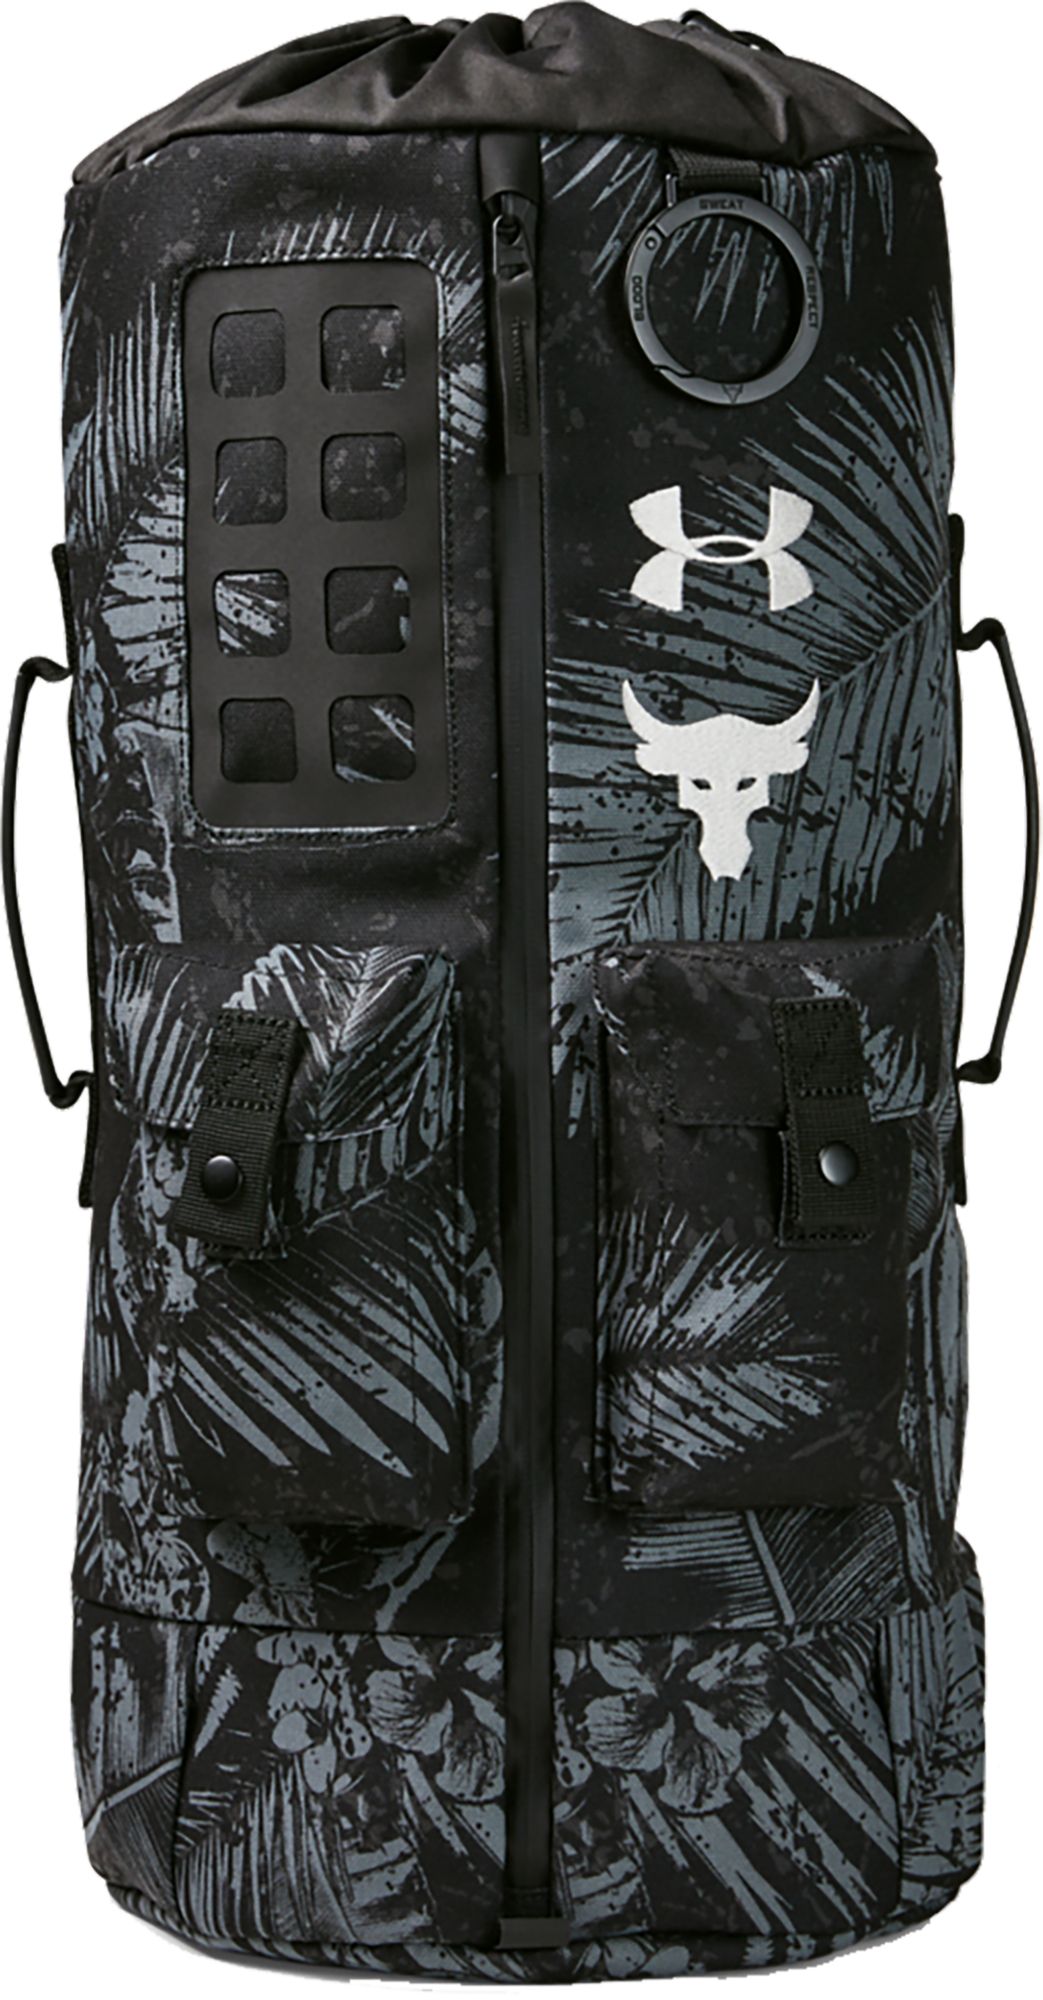 project rock backpack